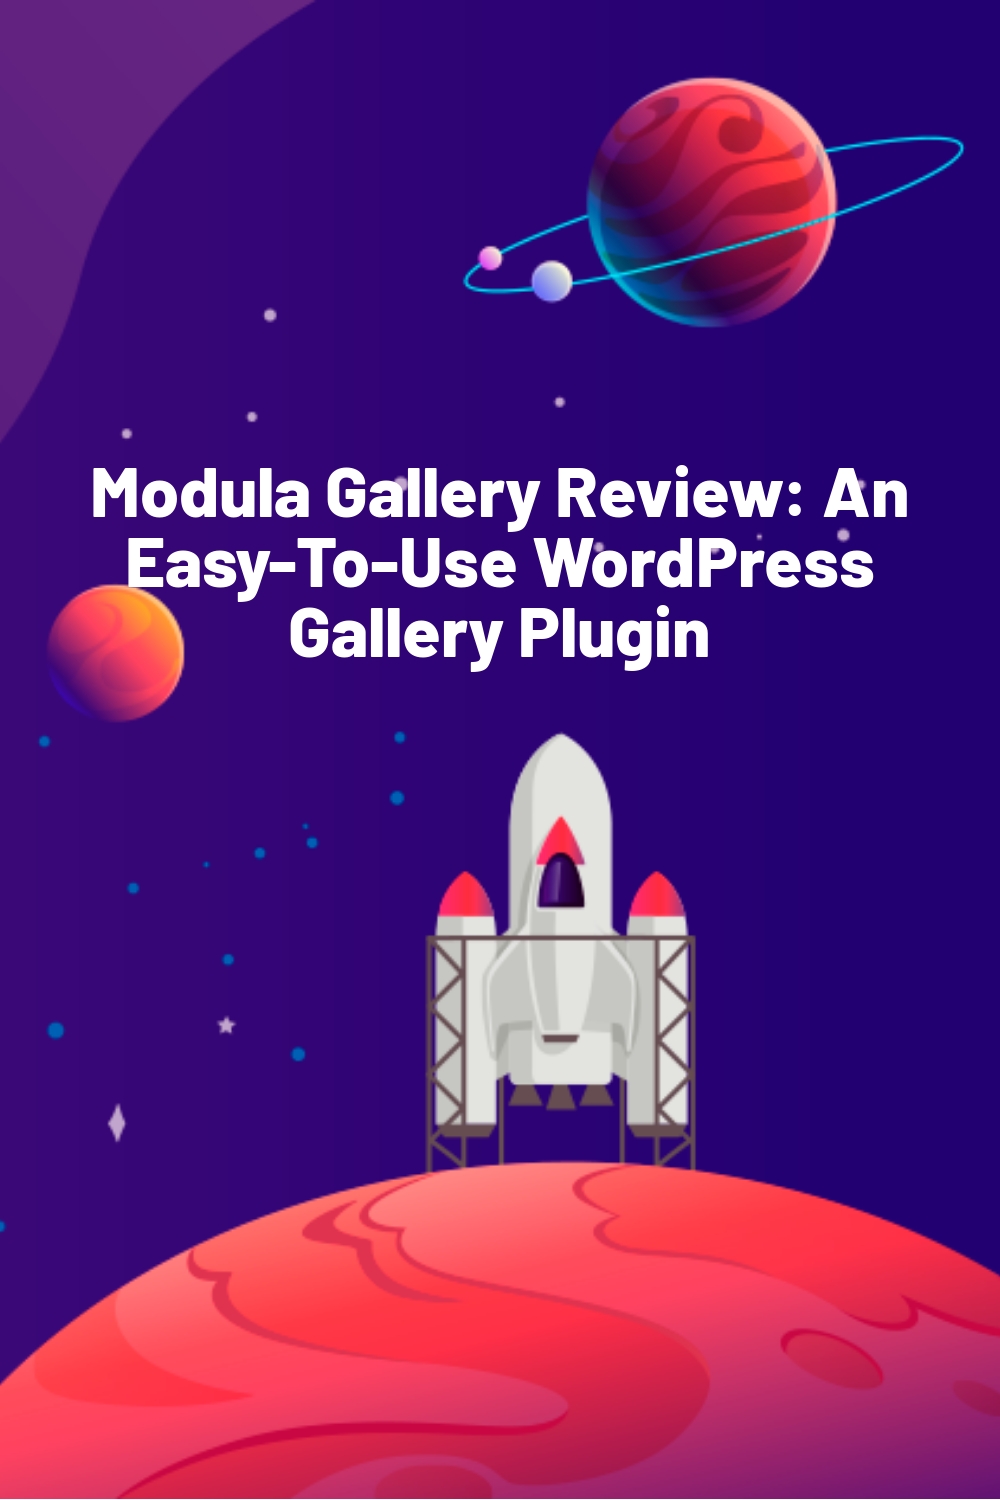 Modula Gallery Review: An Easy-To-Use WordPress Gallery Plugin